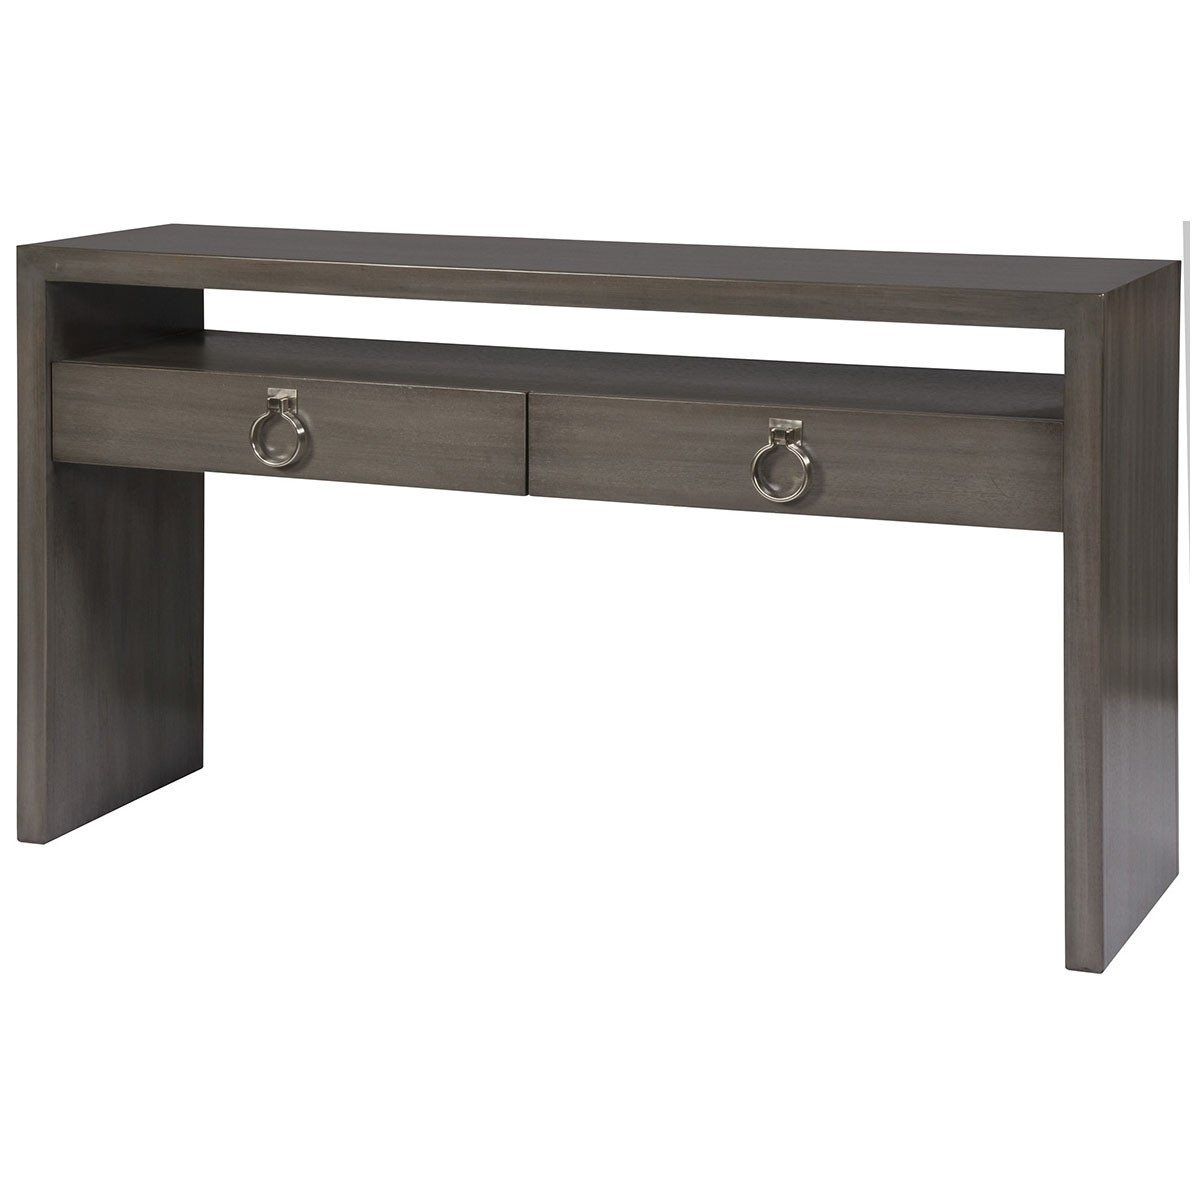 Newest Parsons Concrete Top & Brass Base 48x16 Console Tables Inside Vanguard Furniture Margo Console (View 8 of 20)